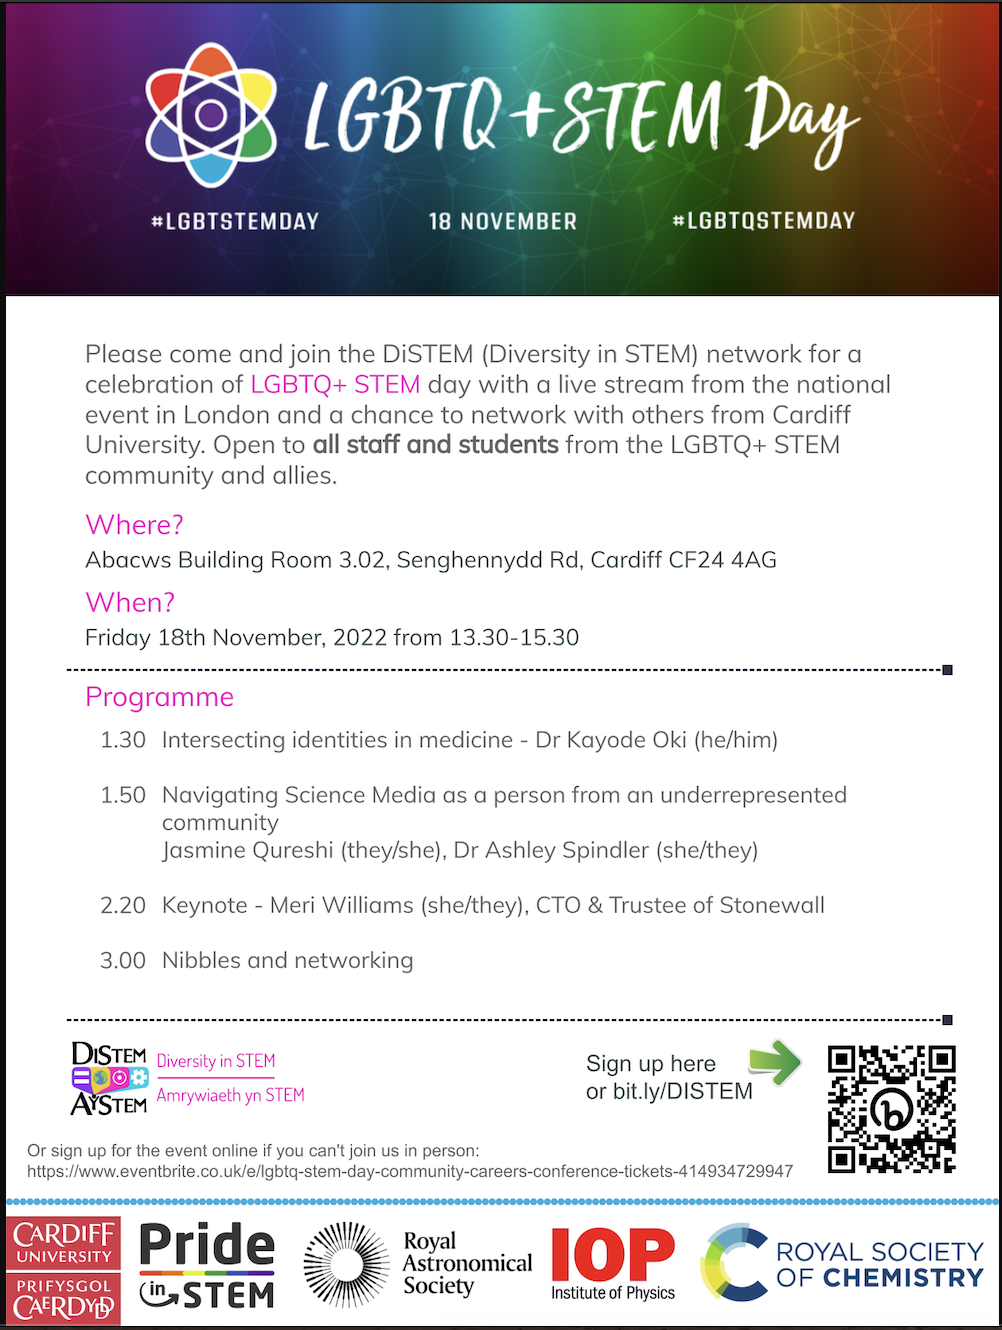 Poster containing information on LGBTQ+ STEM day event streamed live in the Abacws building, room 3.02, on Friday 18th November 2022 from 13.30-15.30 by the Diversity in STEM network.